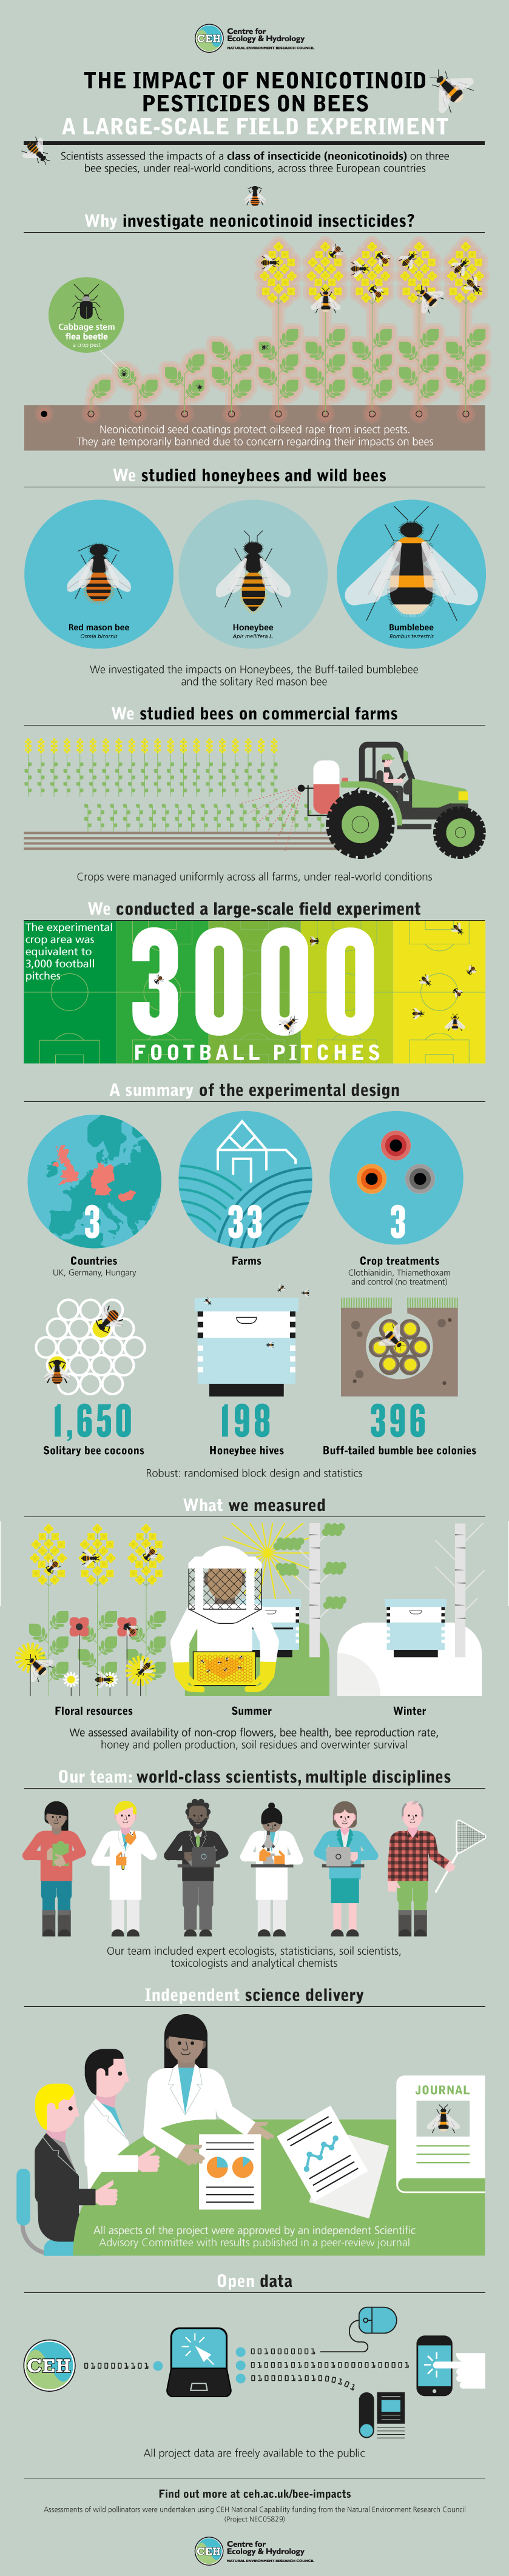 infographic large-scale field experiment impacts of neonicotinoids on bees